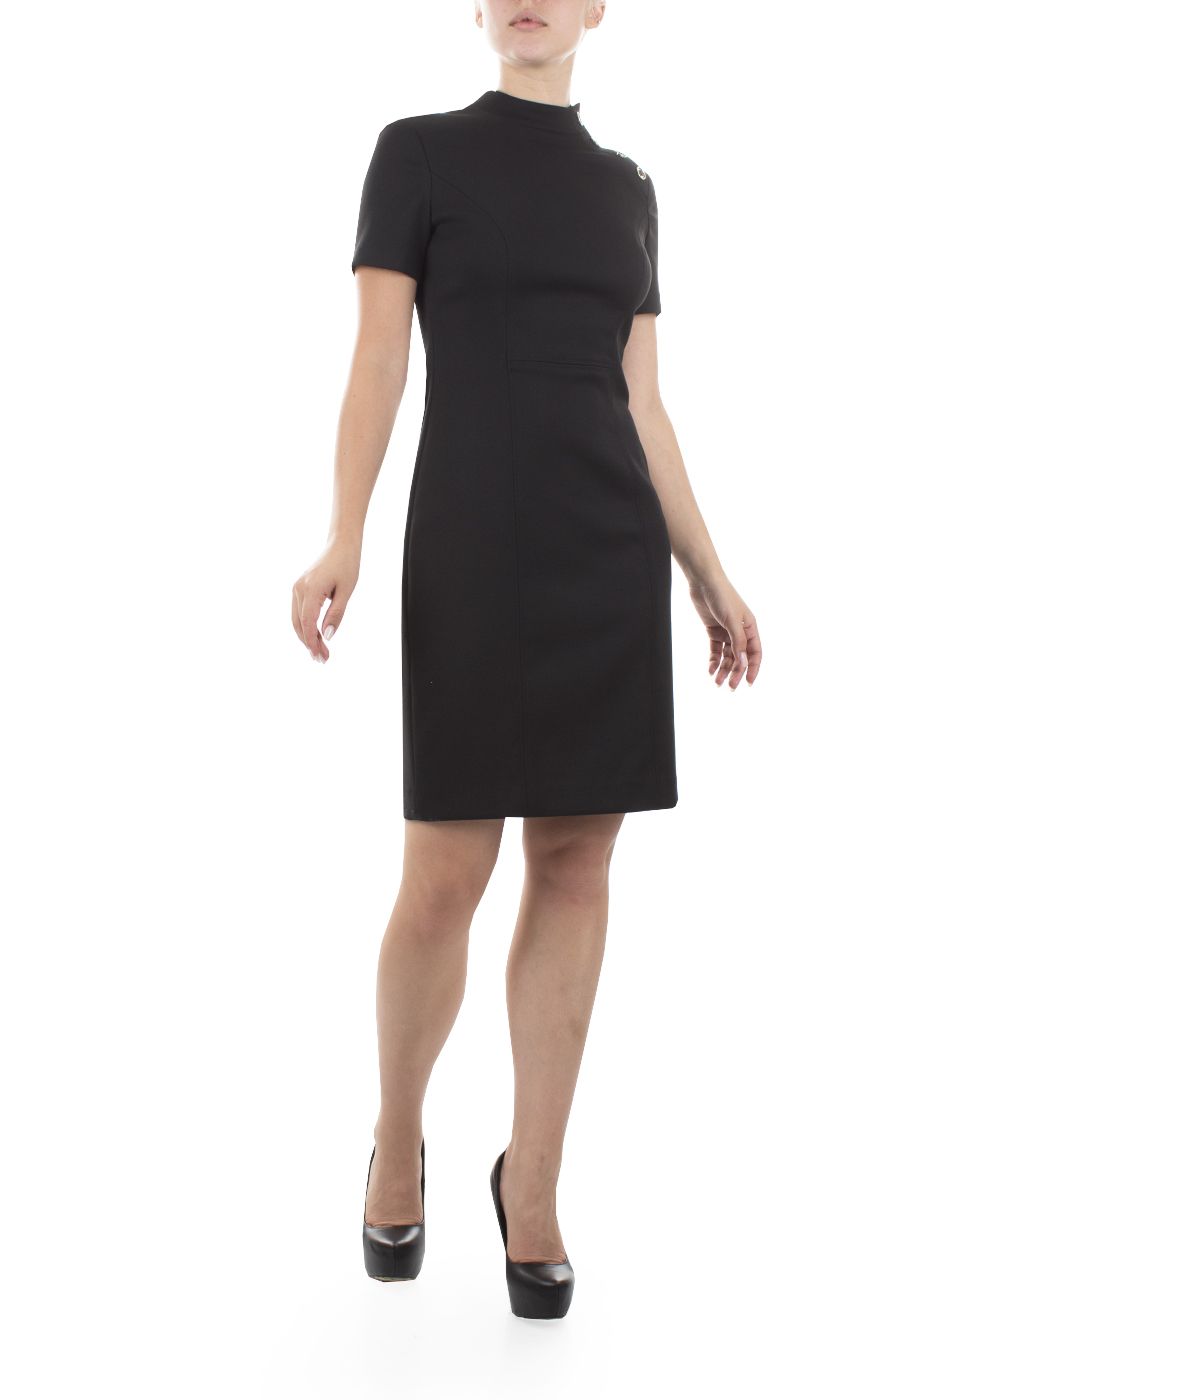 Semi-turtleneck dress with side buttons, short sleeves, rayon and viscose 3